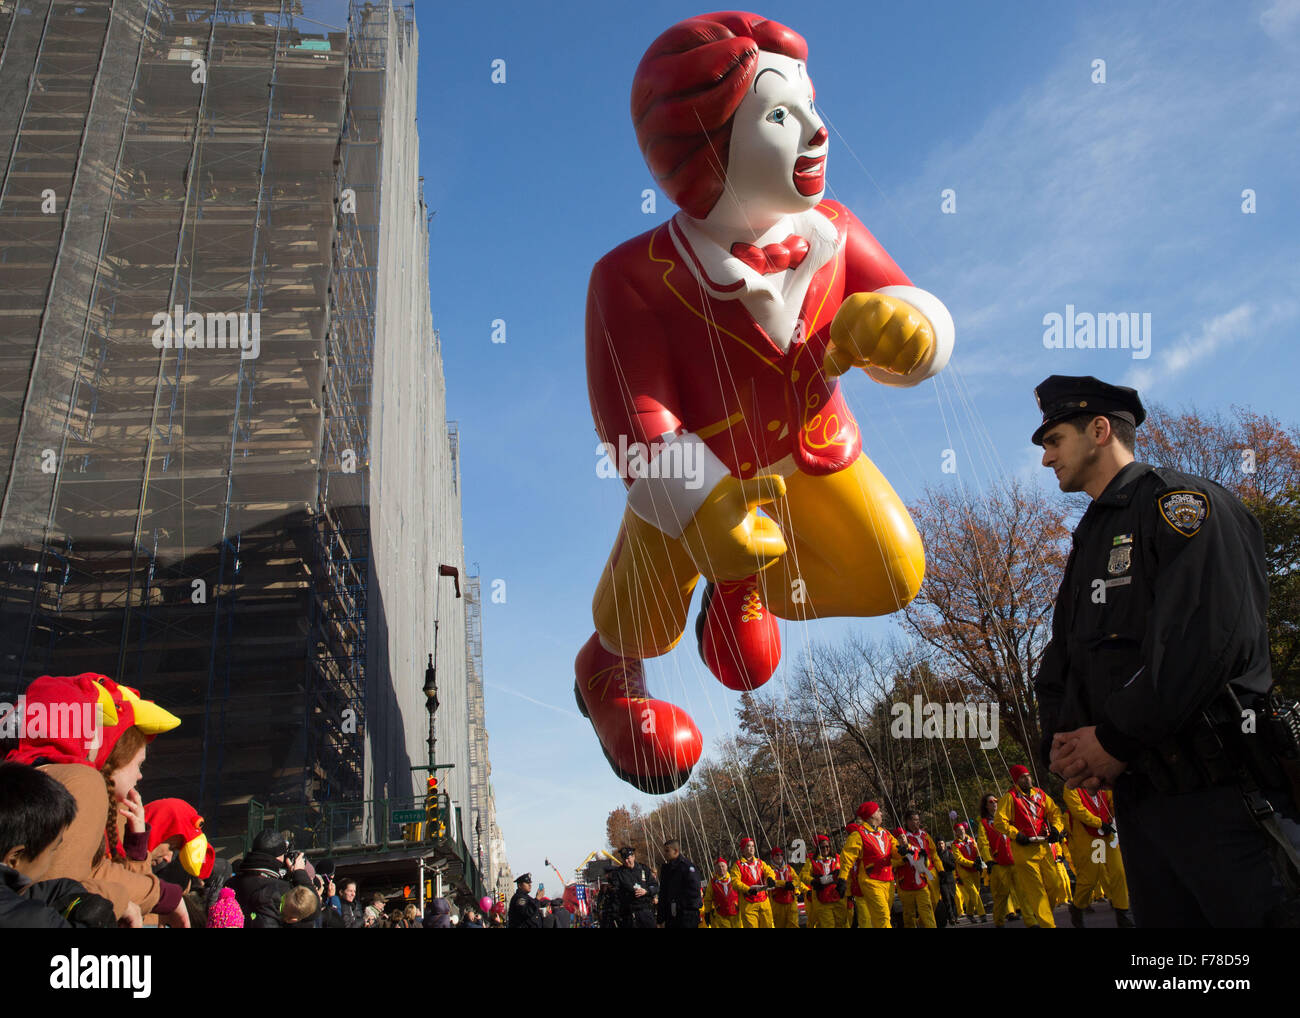 New York, NY, USA. 26th November, 2015. NYPD and New York City task force were on high alert at the Thankgiving Day Parade in New York City. It was a record number of police officers patrolling the annual Macy's Thankgiving Day Parade due to the terrorist attacks in Paris and terrorist threats to New York. Credit:  Scott Houston/Alamy Live News Stock Photo